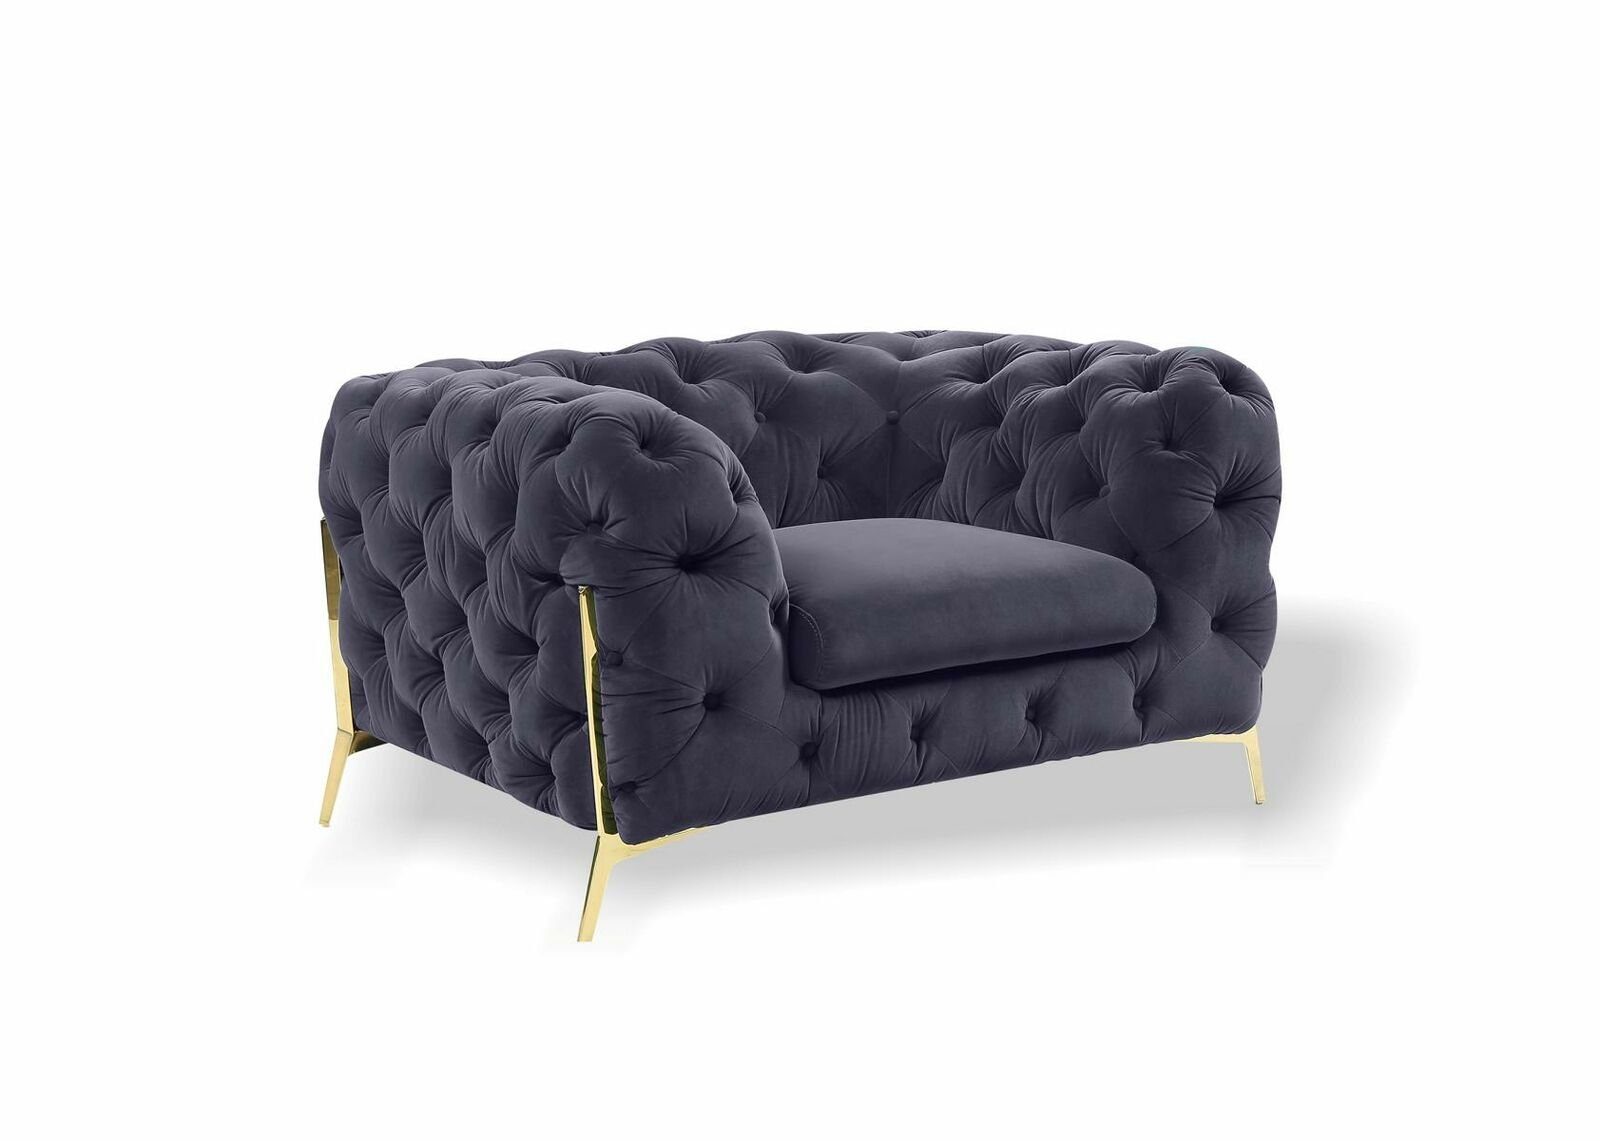 JVmoebel (Sessel), Sessel in Sofa Polster Europe Ohrensessel 1 Ohrensessel Couch Sitzer Blau Chesterfield Made Couch